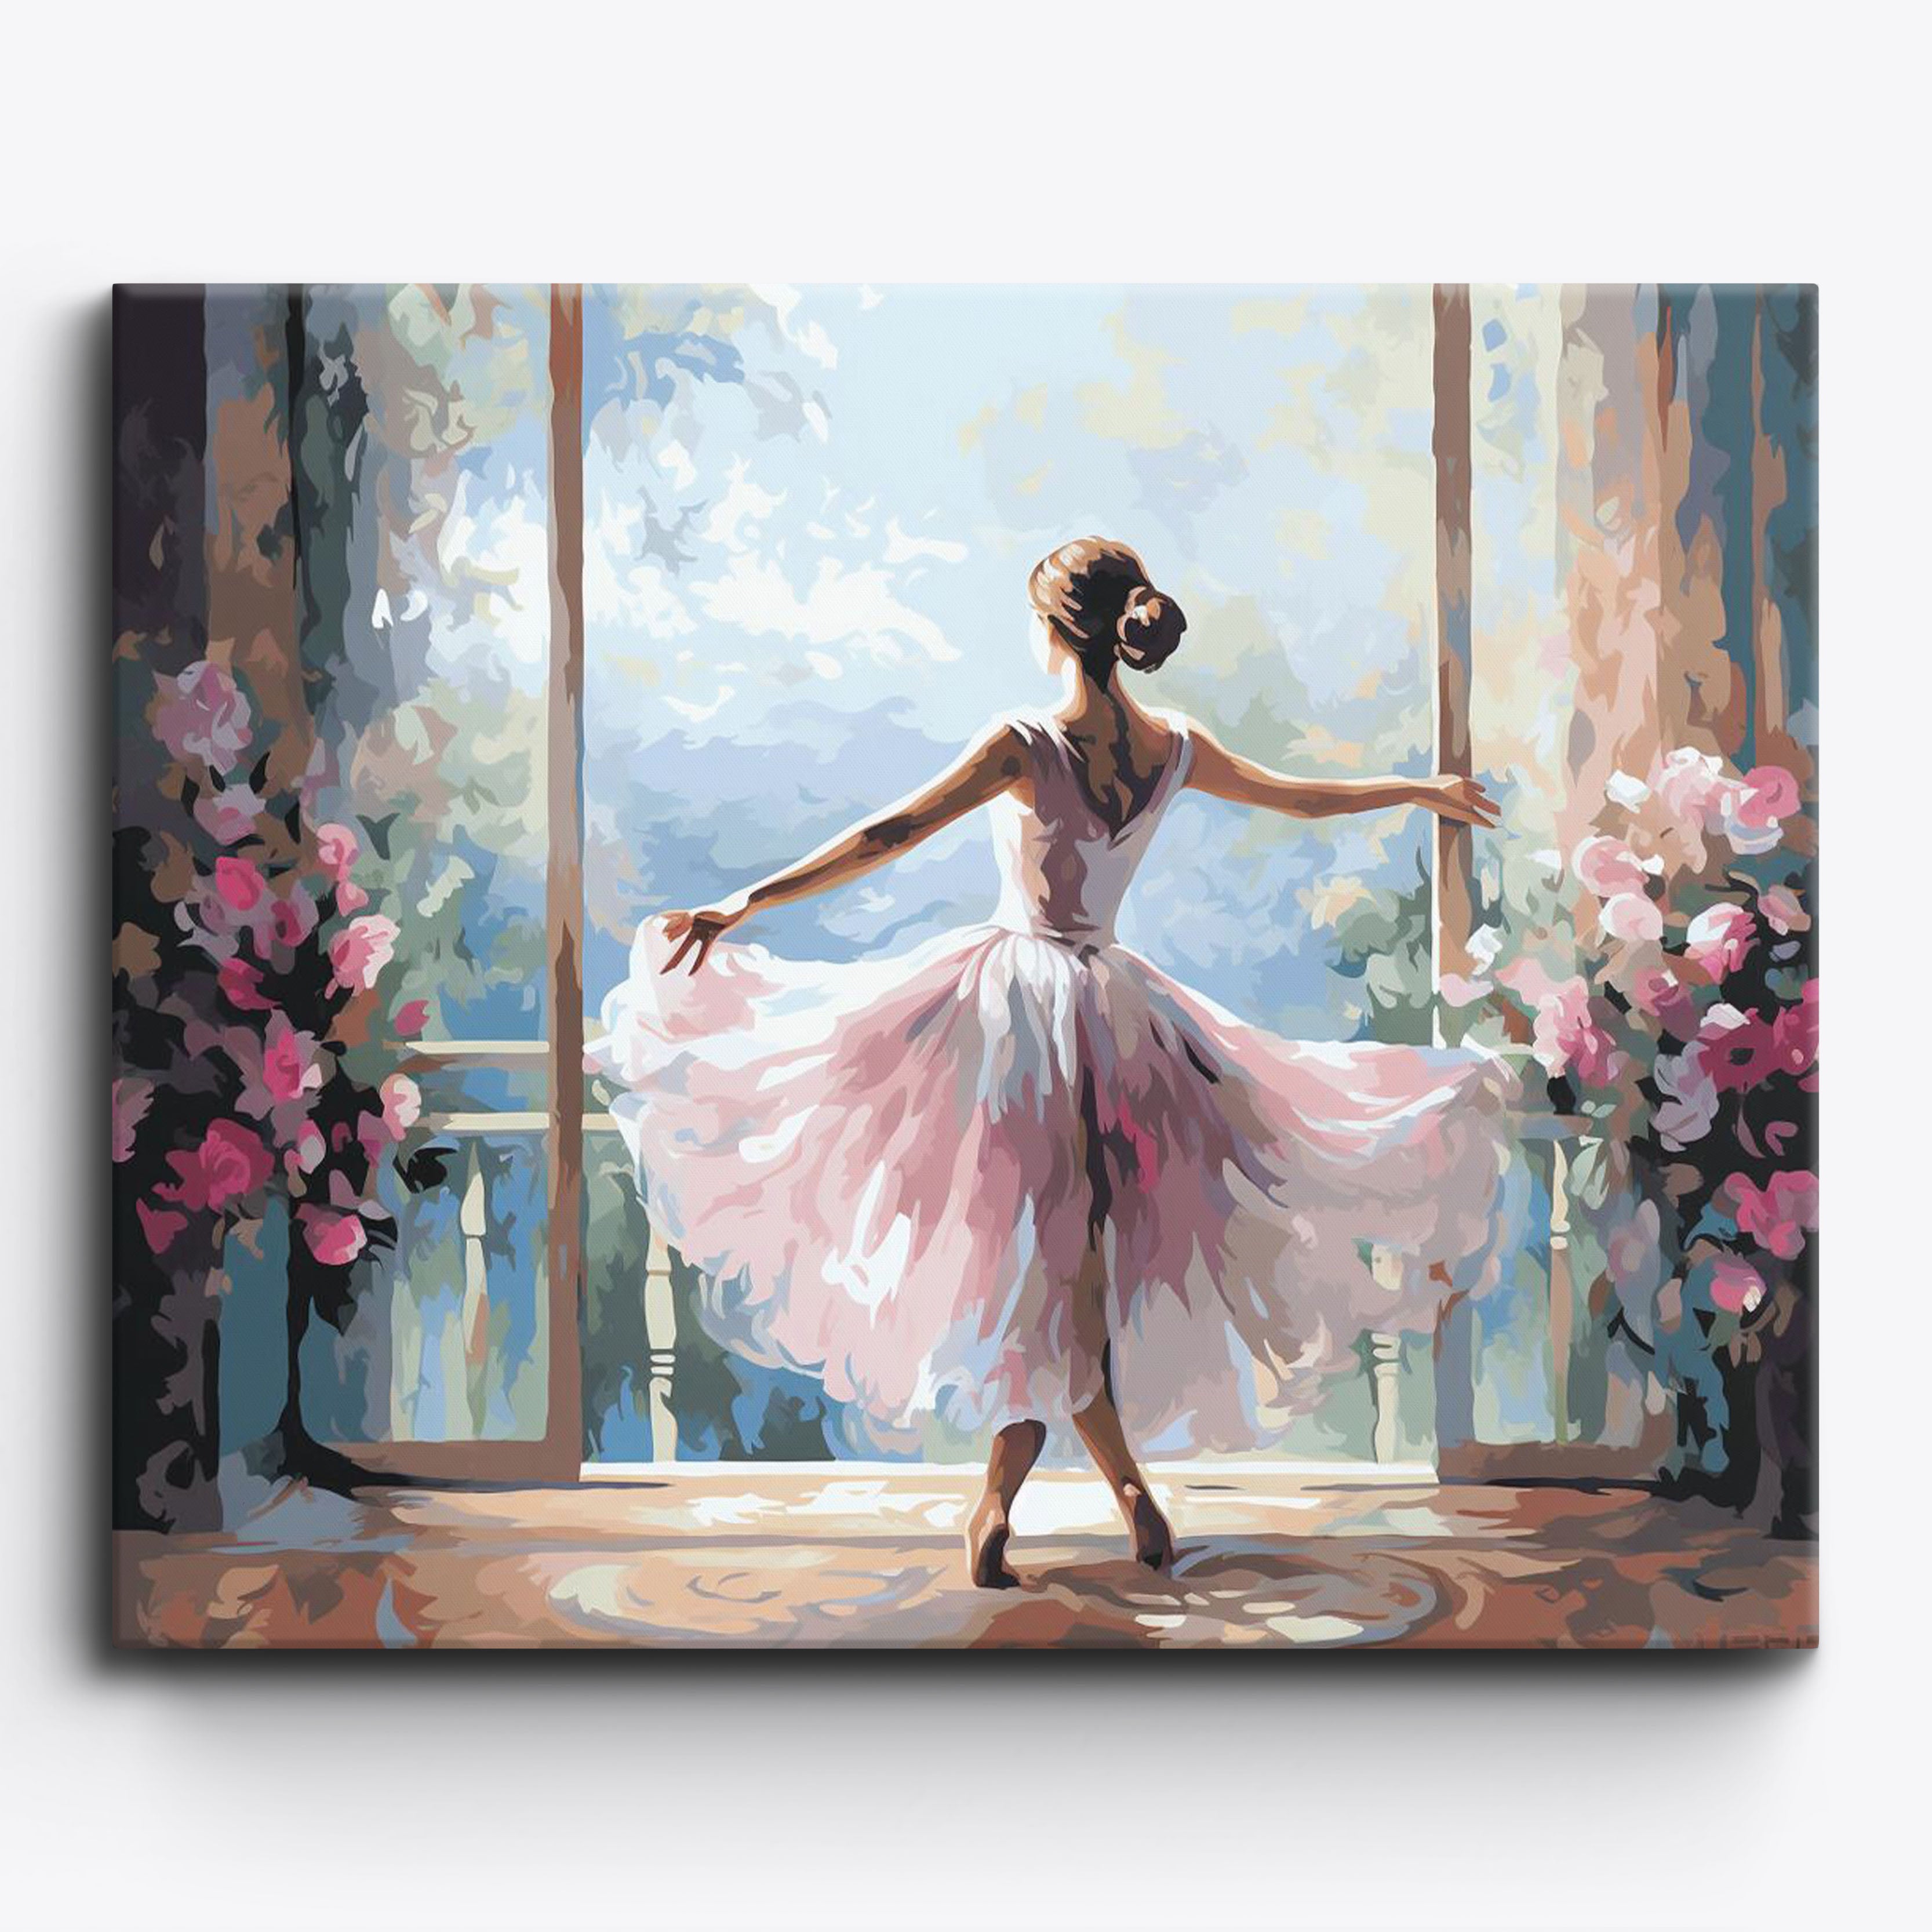 Colorful Ballet Dancer Painting By Numbers Kit DIY Acrylic Paint